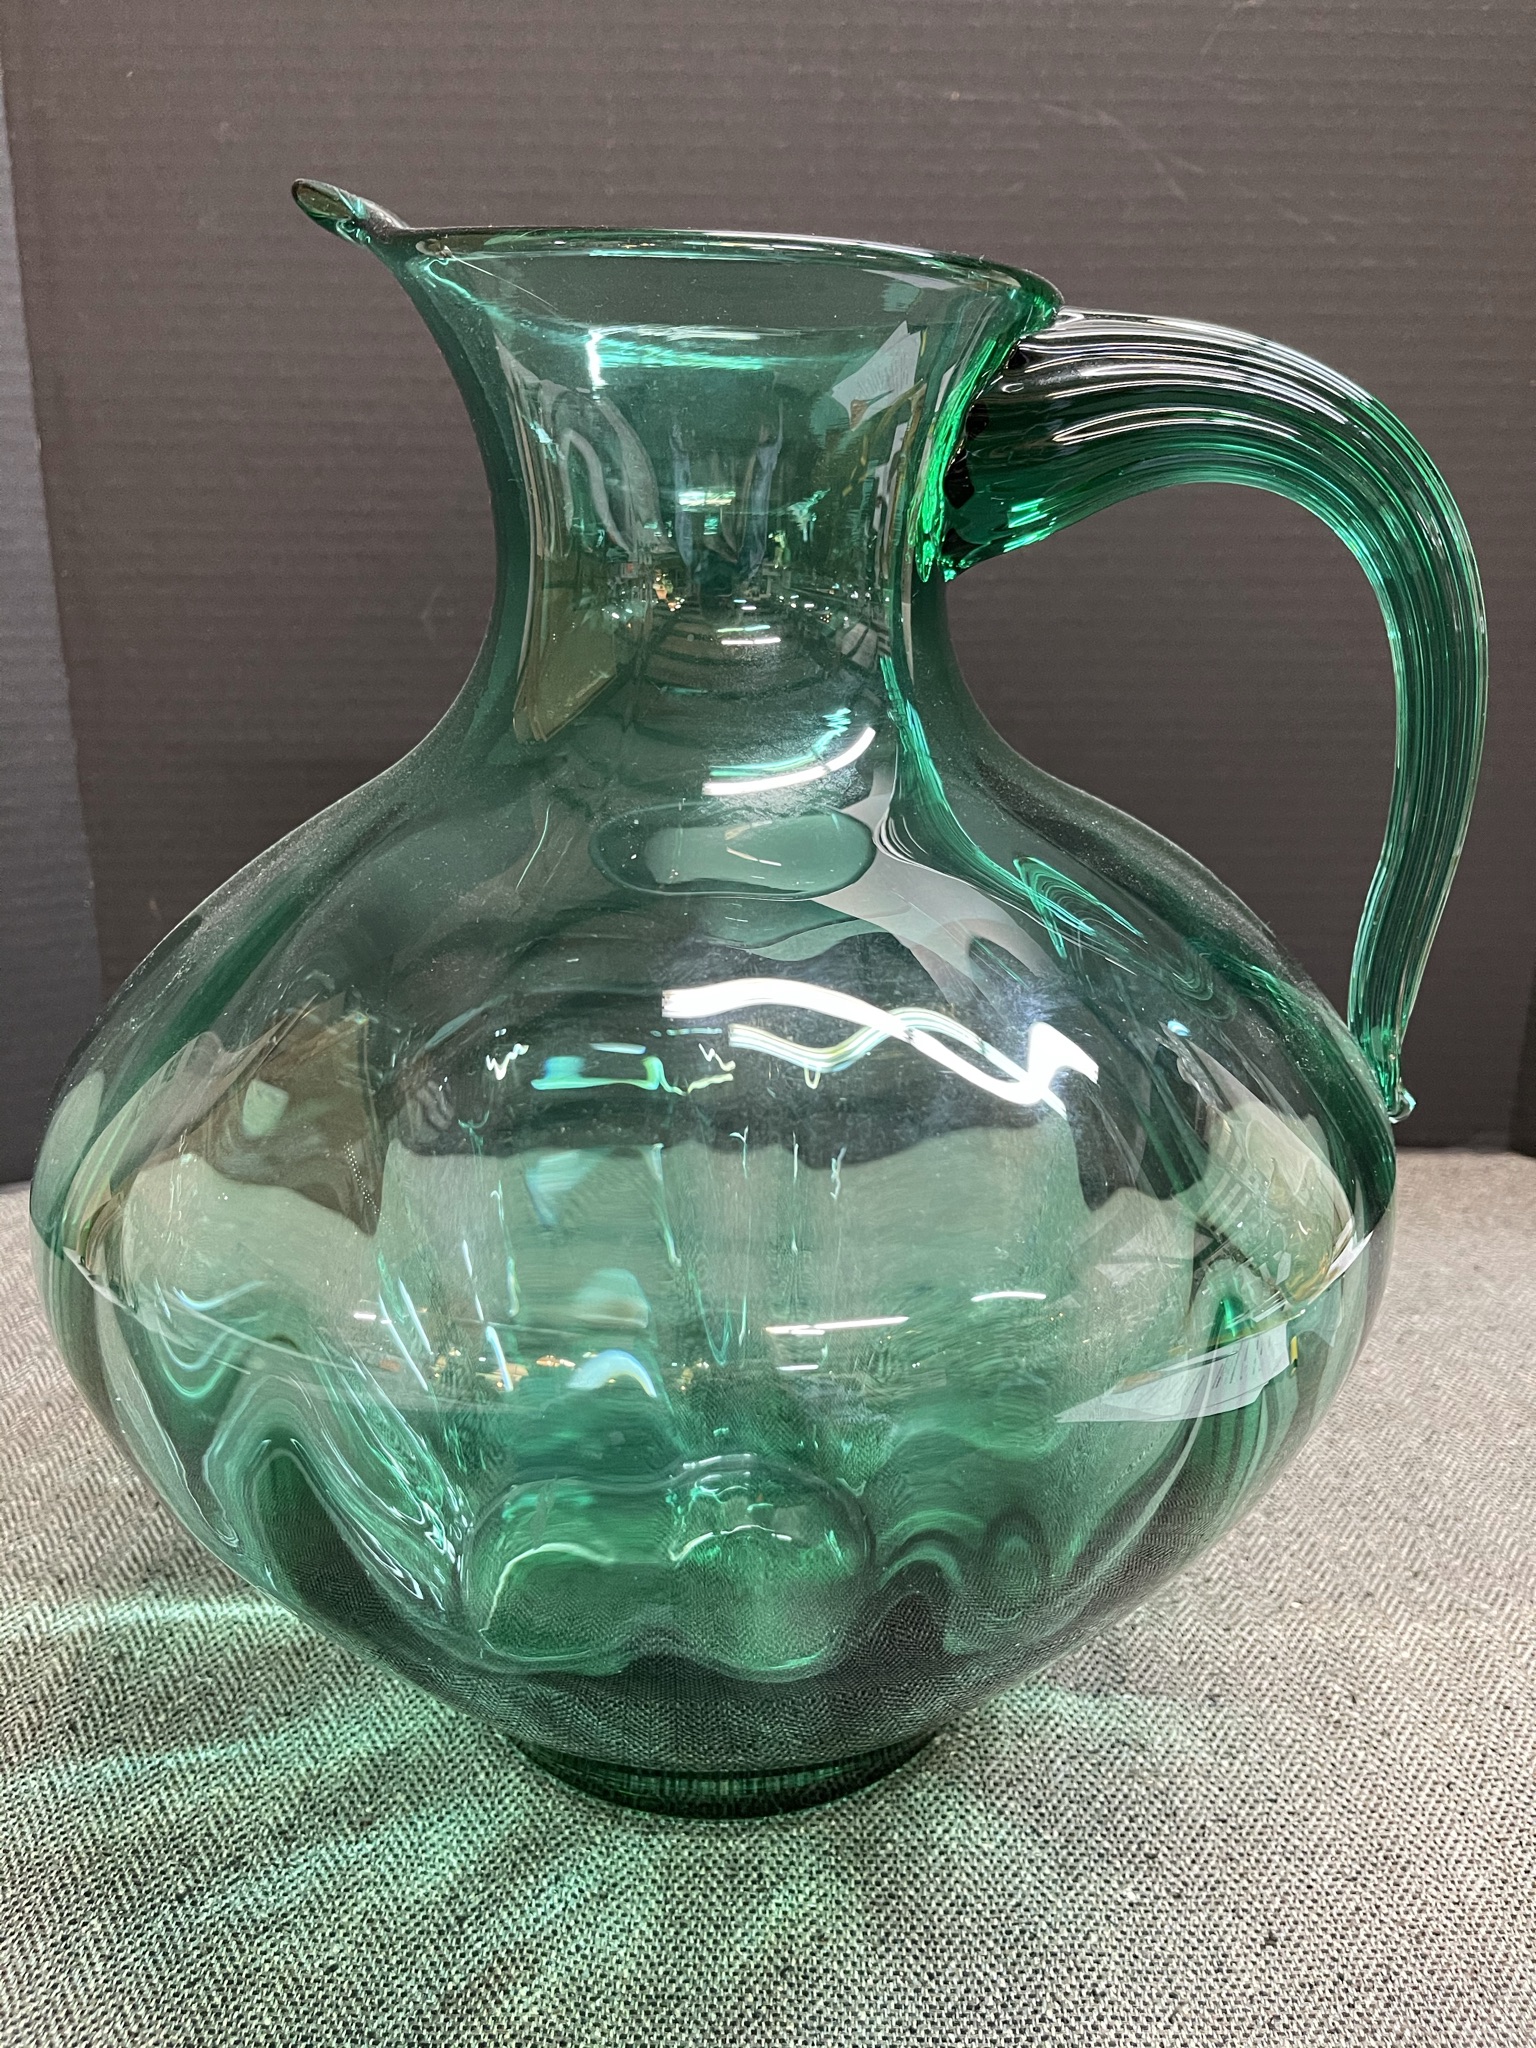 Blenko 14 inch tall pitcher. The fresh green color imparts energy and is a joy to look at! This beautiful vessel has no chips and is in excellent condition.